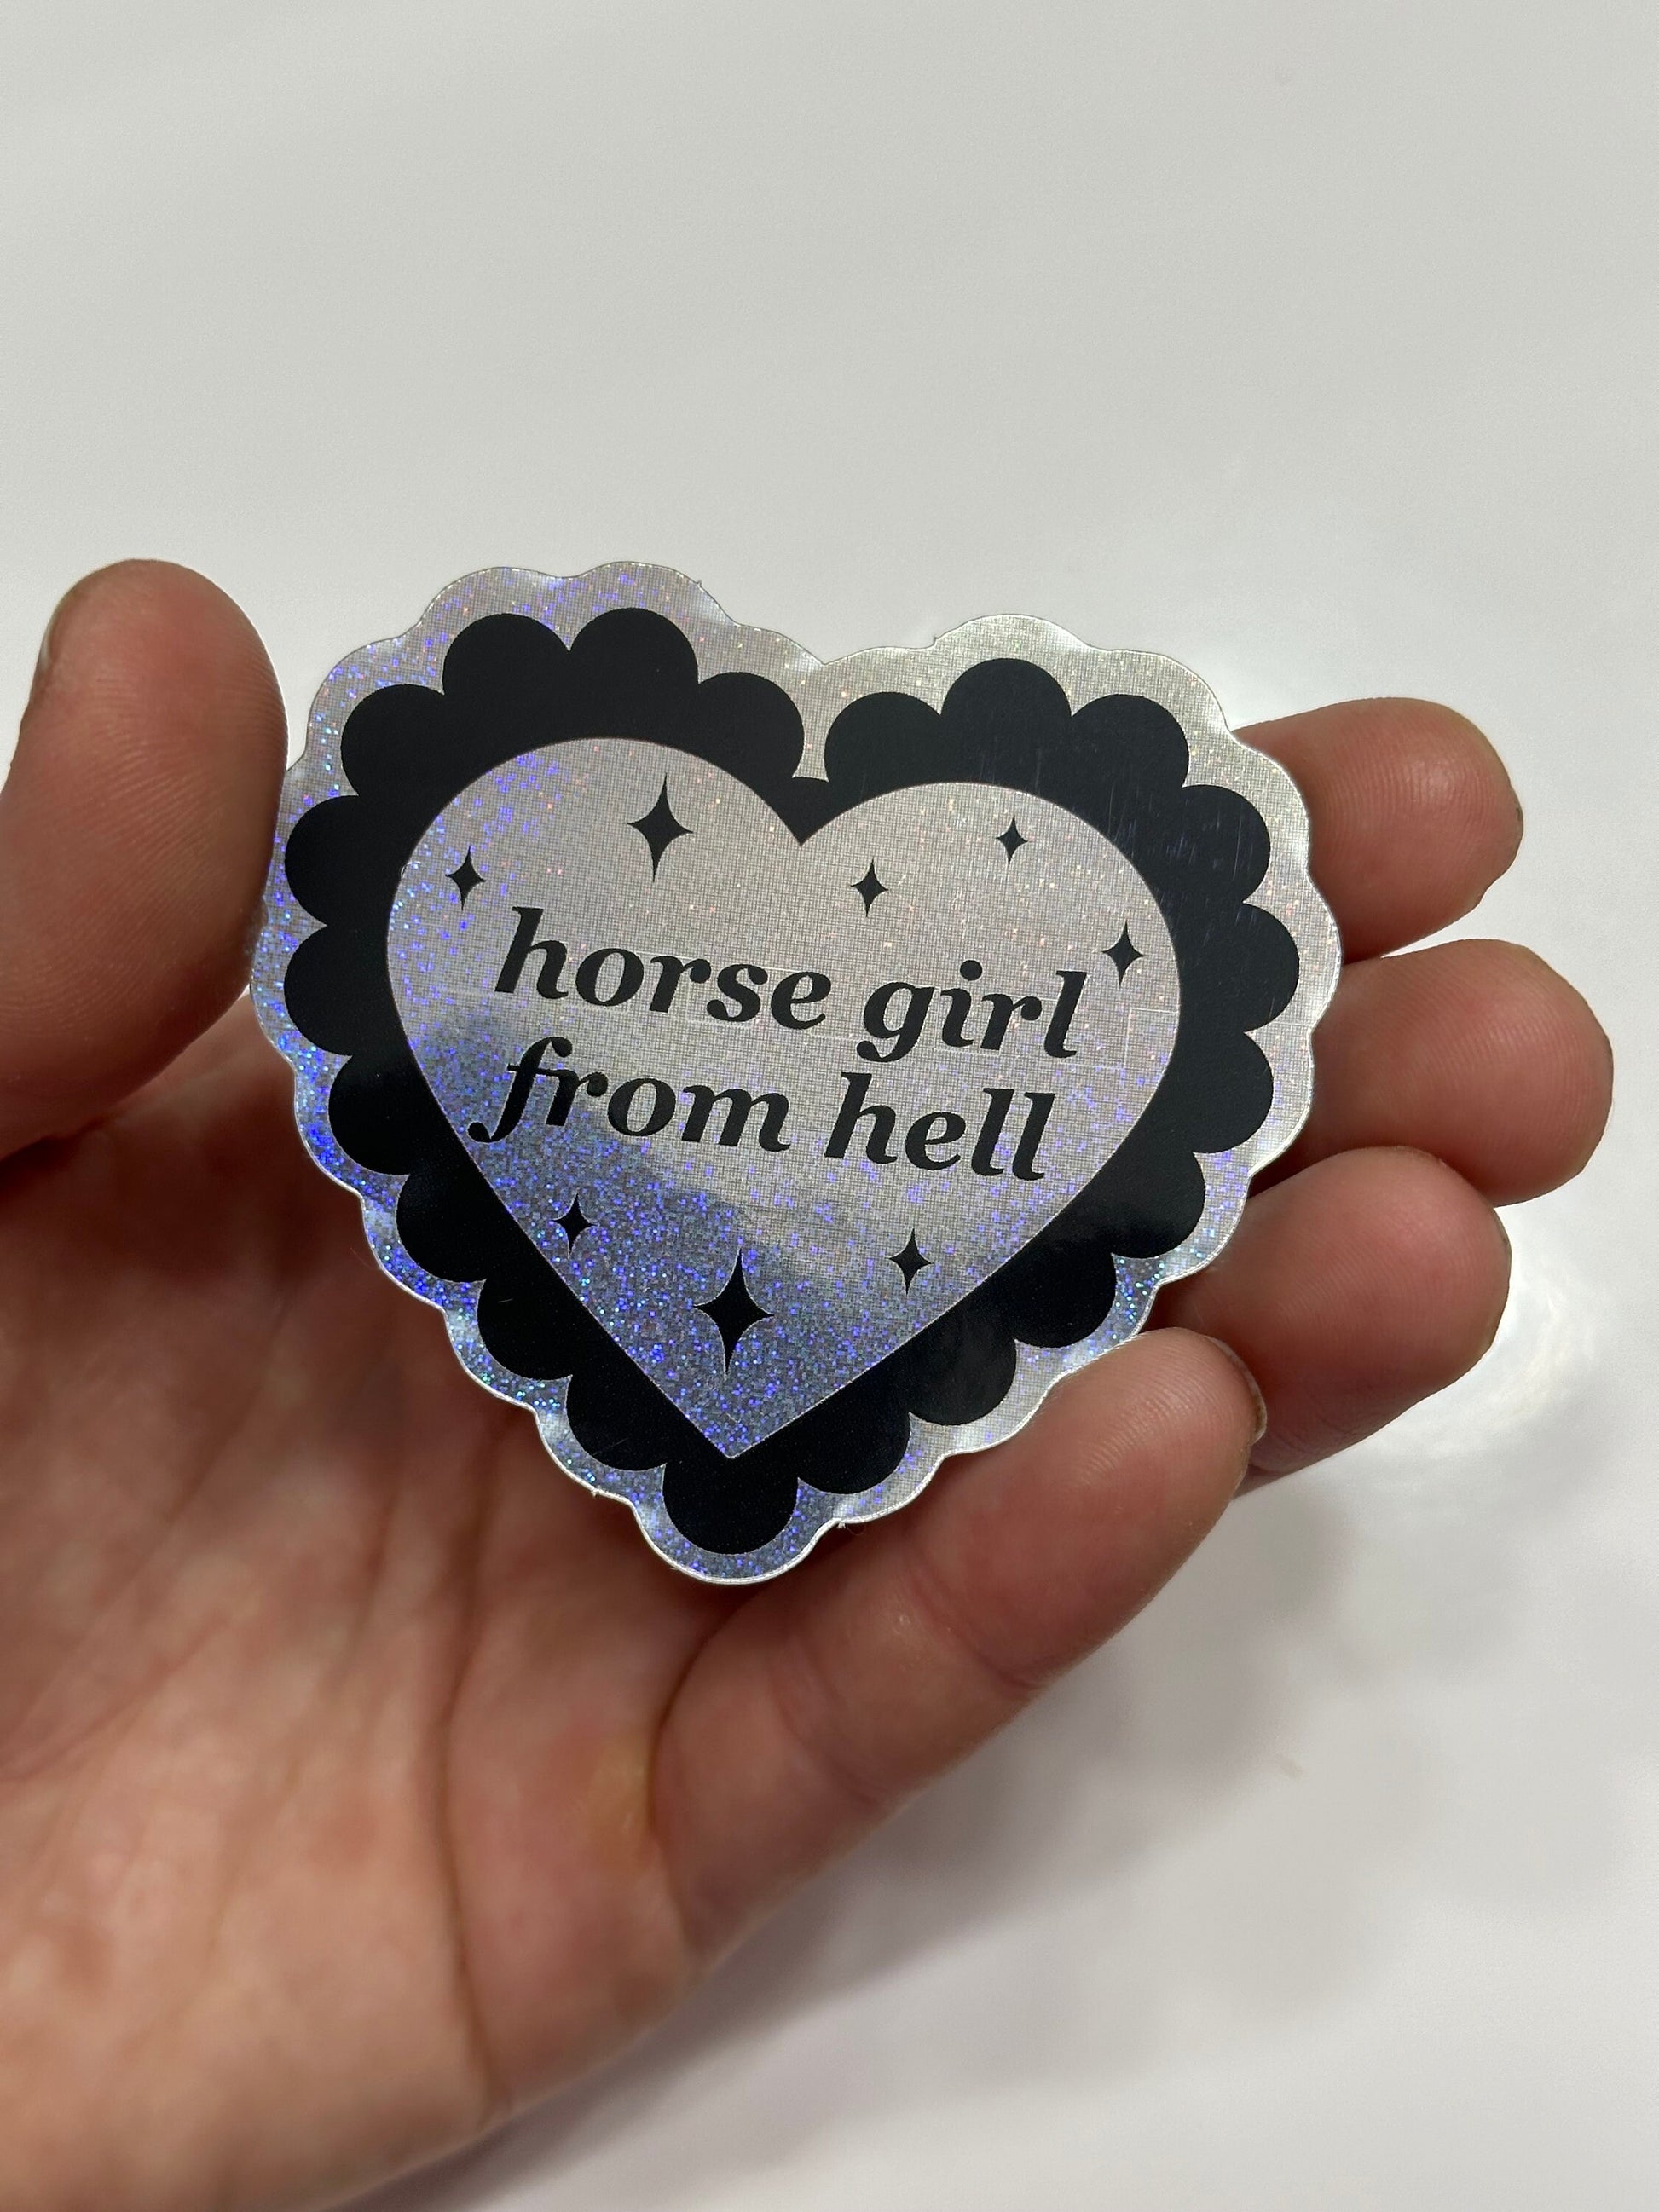 Horse Girl From Hell Scalloped Pixie Dust Sticker 2.7x2.5